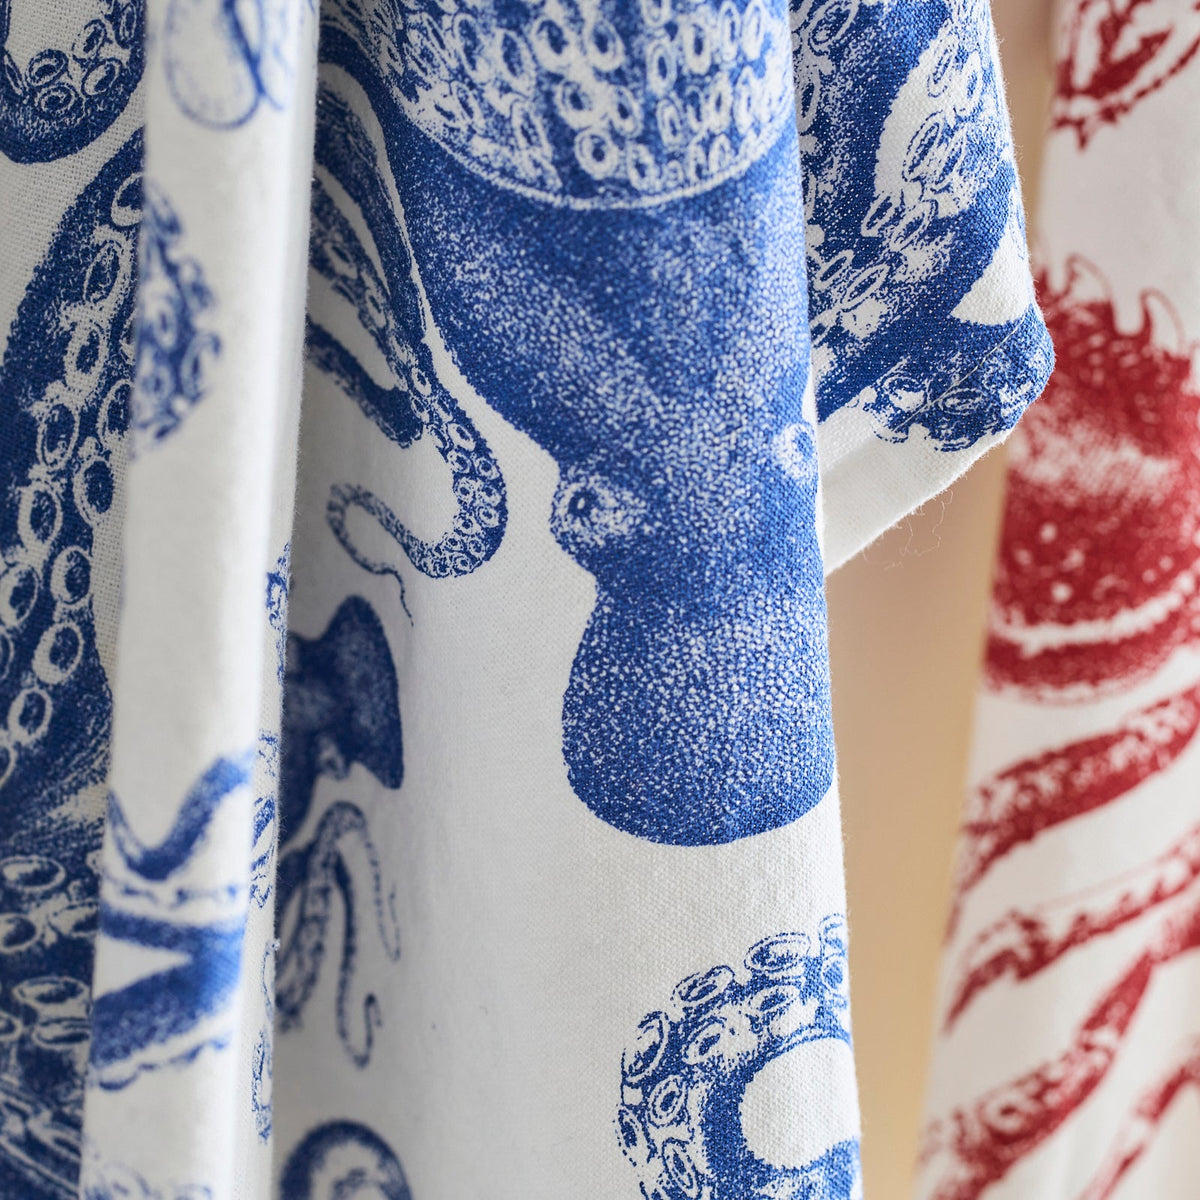 Blue and white Lucy Kitchen Towels Set/2 with a touch of seafaring whimsy featuring an octopus, the deepwater dweller.